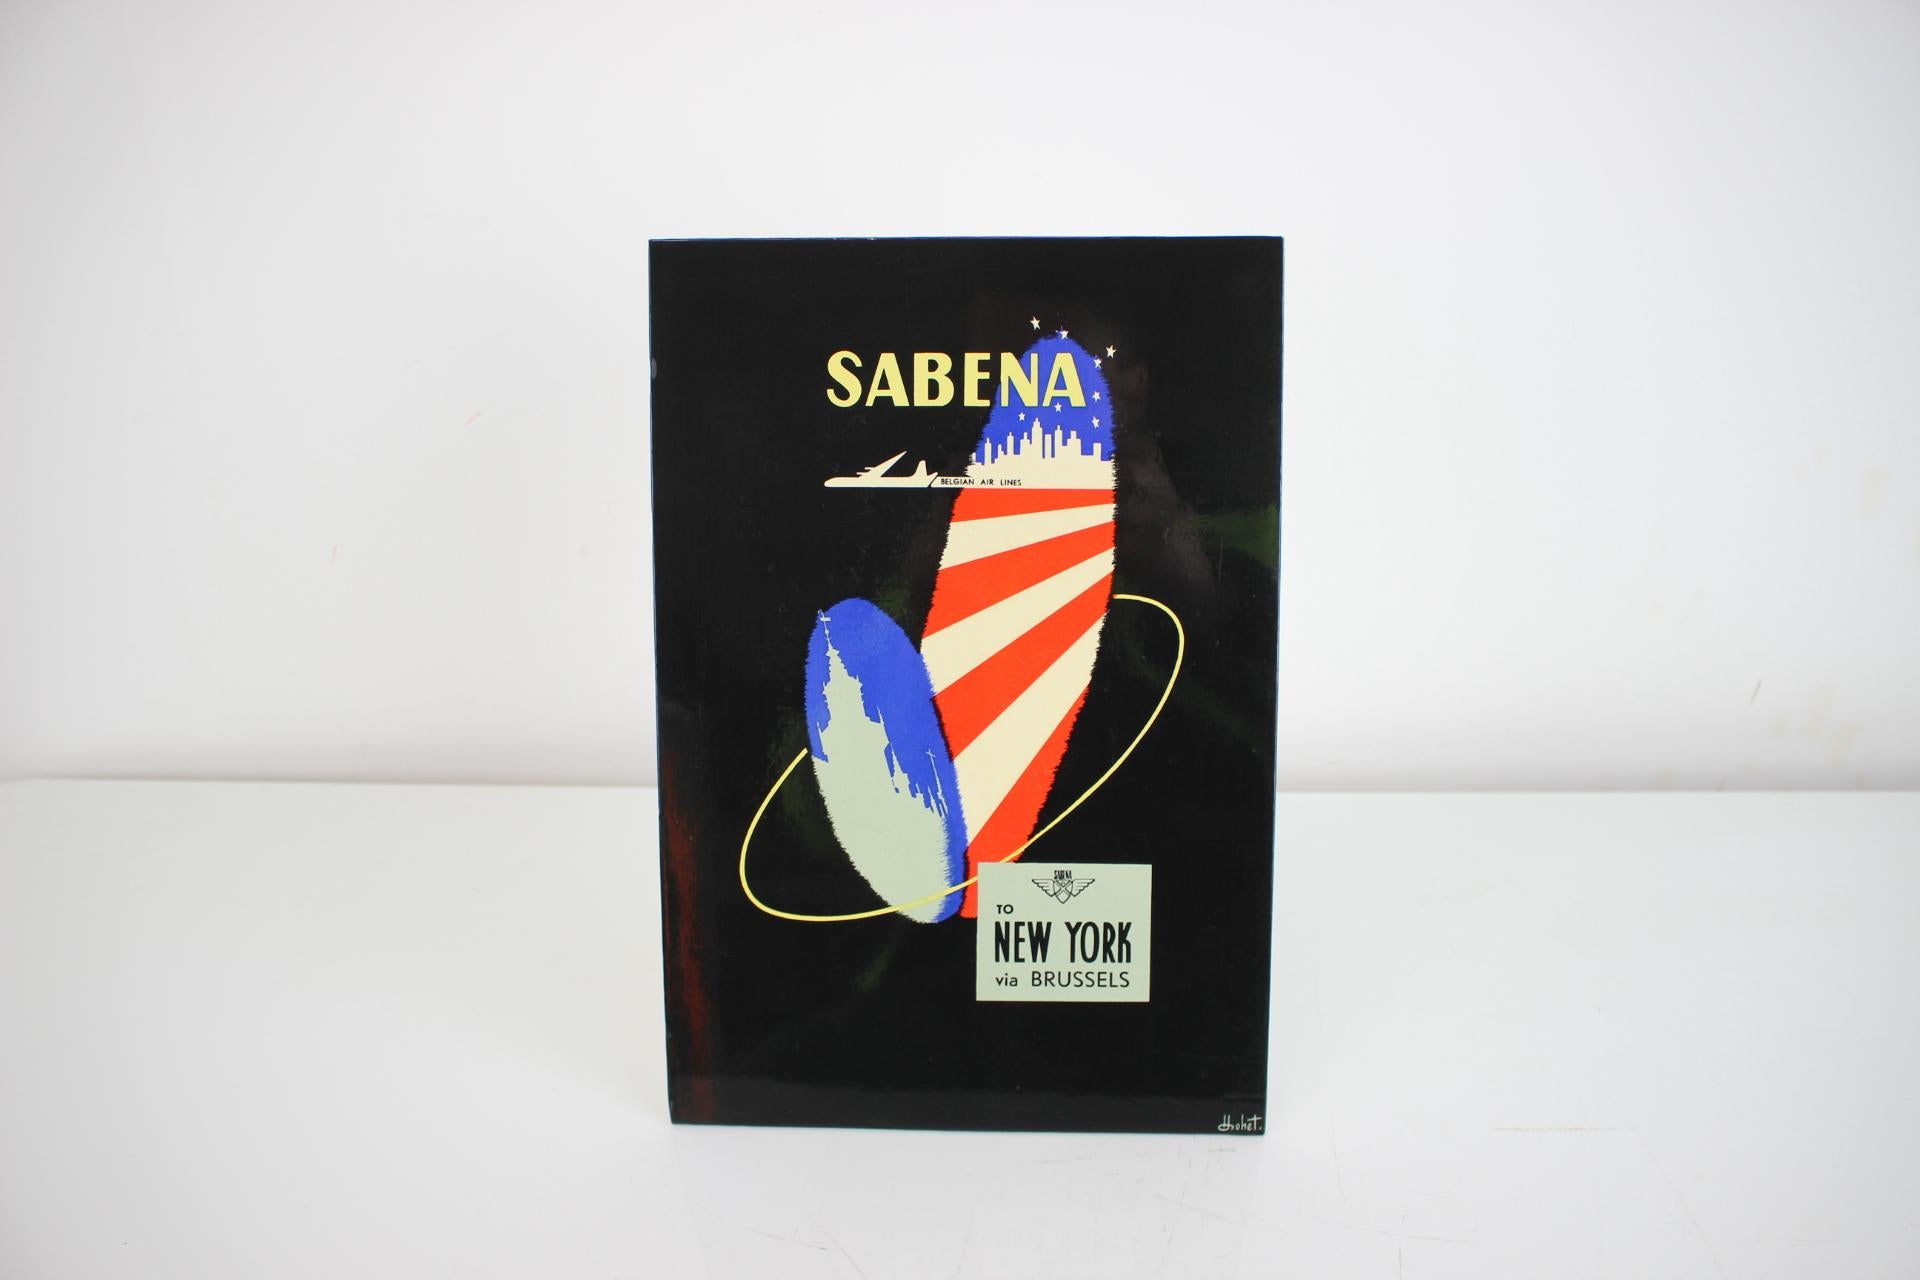 
- made of hard paper
- good, original condition.
SABENA is an acronym for The Societe Anonyme Belge d'Exploitation de la Navigation Arienne, or Belgian Corporation for Air Navigation Services. It was an airline based in Belgium, started in the